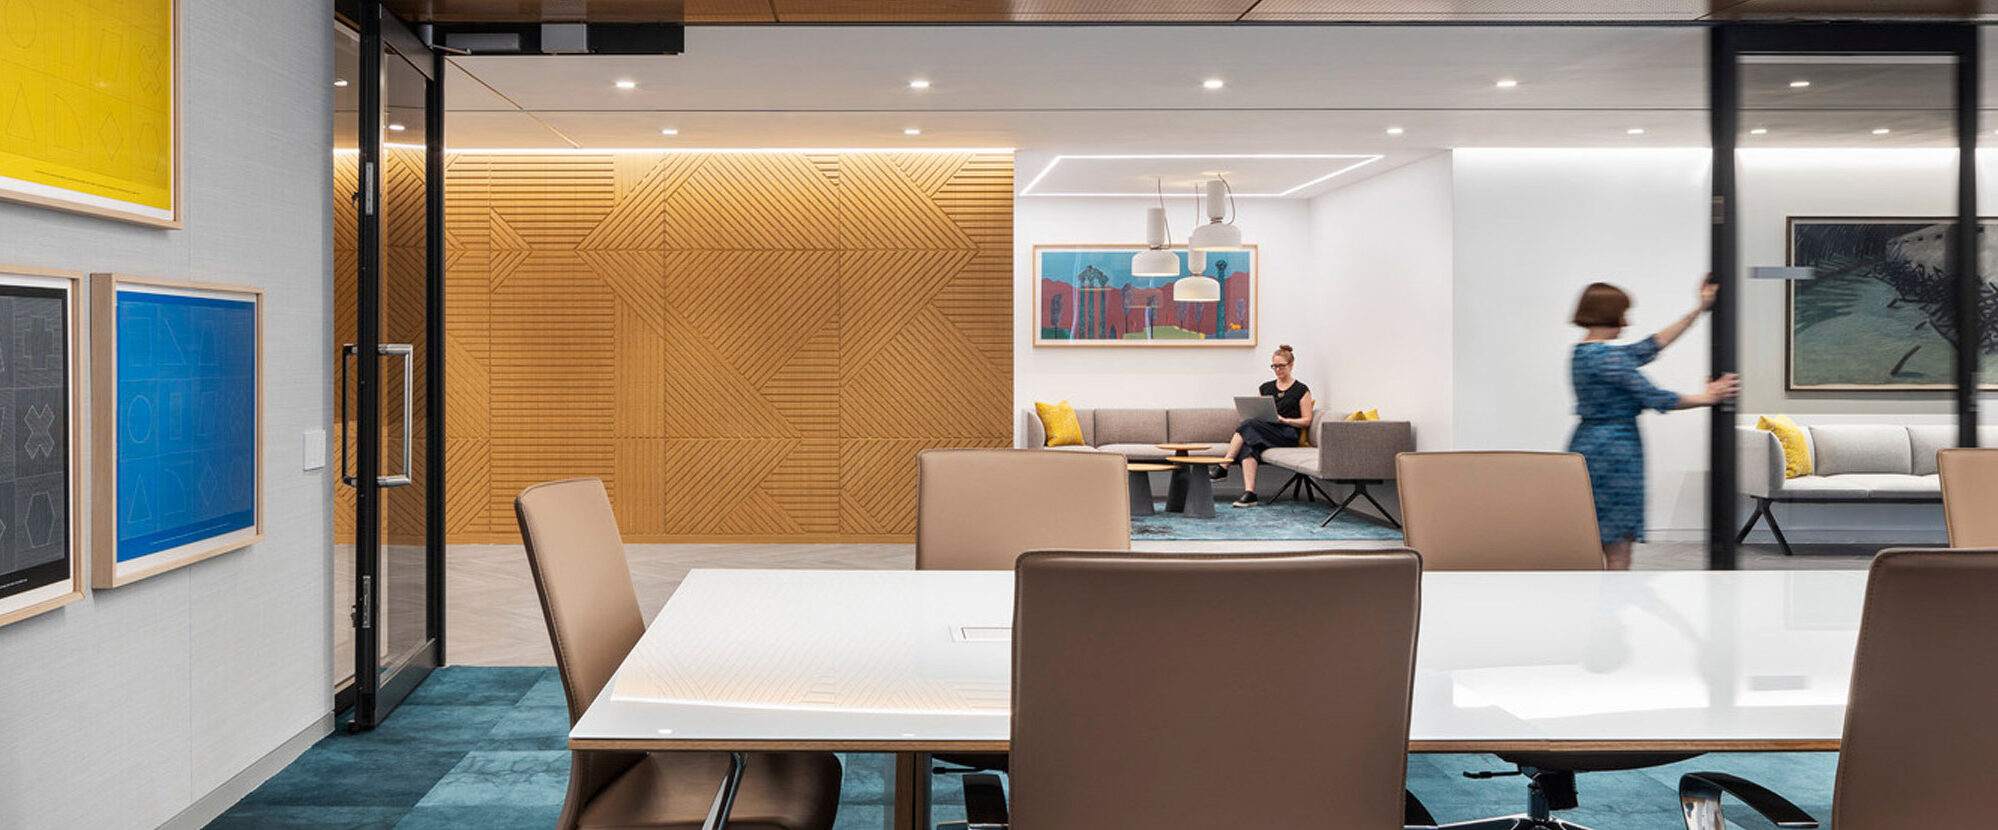 Modern office conference room featuring a sleek rectangular table, leather rolling chairs, and wood-paneled walls with integrated lighting. Vibrant artwork and deep blue carpet add a pop of color, while glass walls provide transparency and connectivity to adjacent spaces.